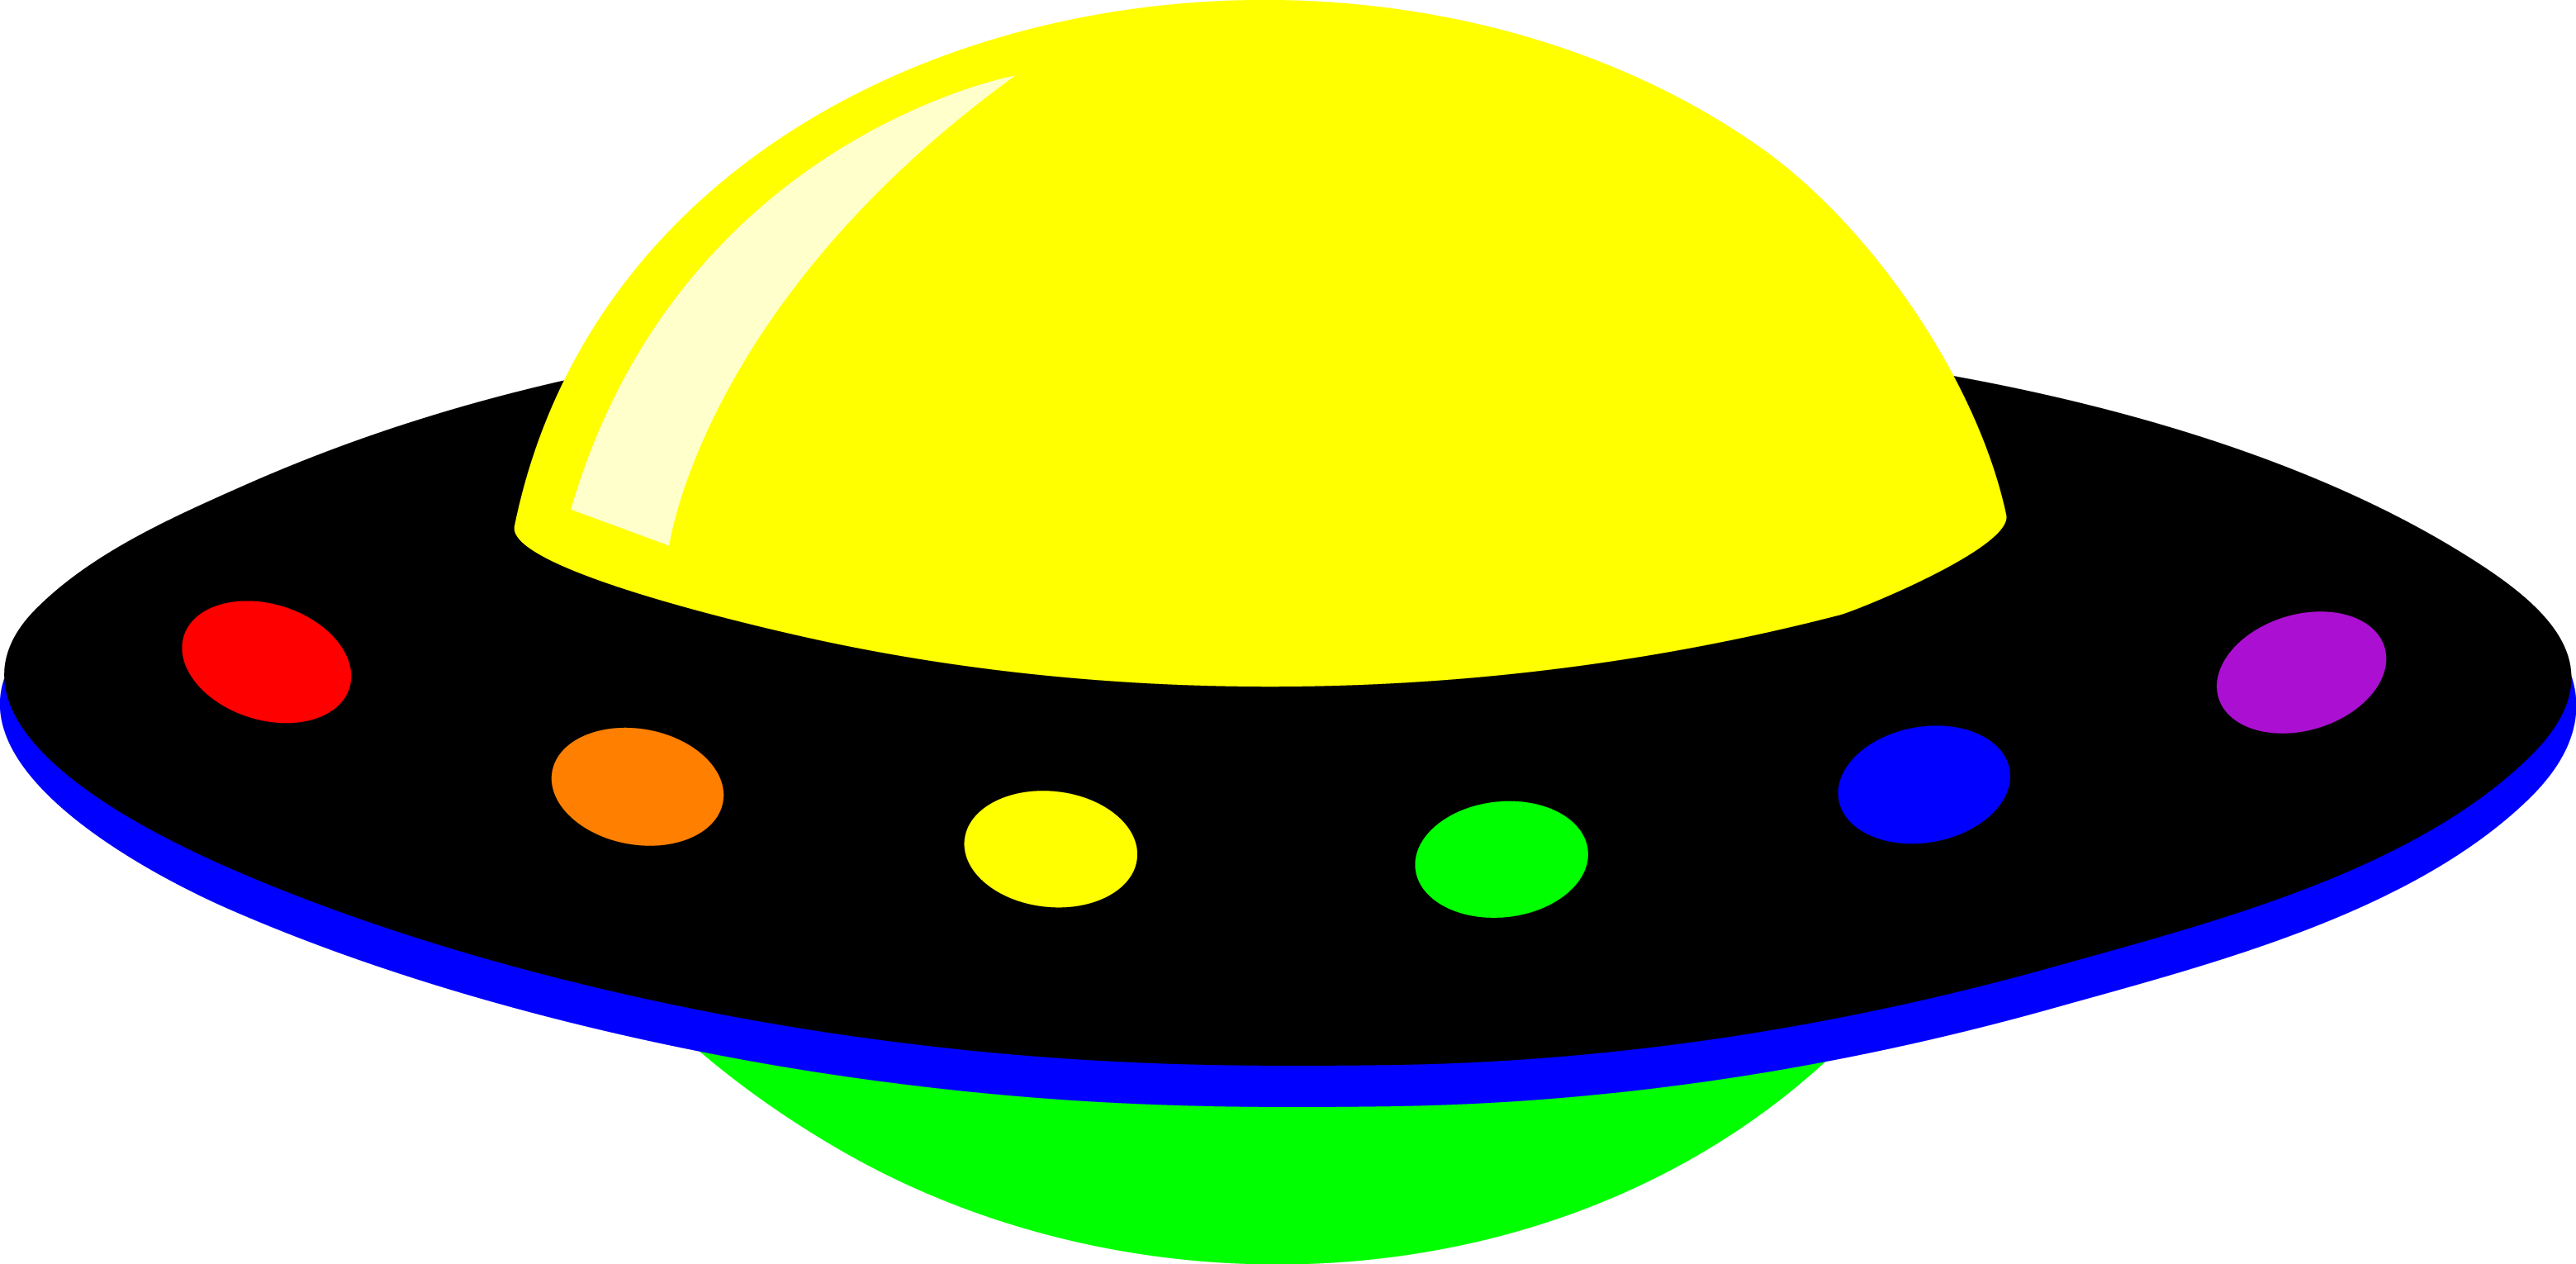 space clipart - photo #37